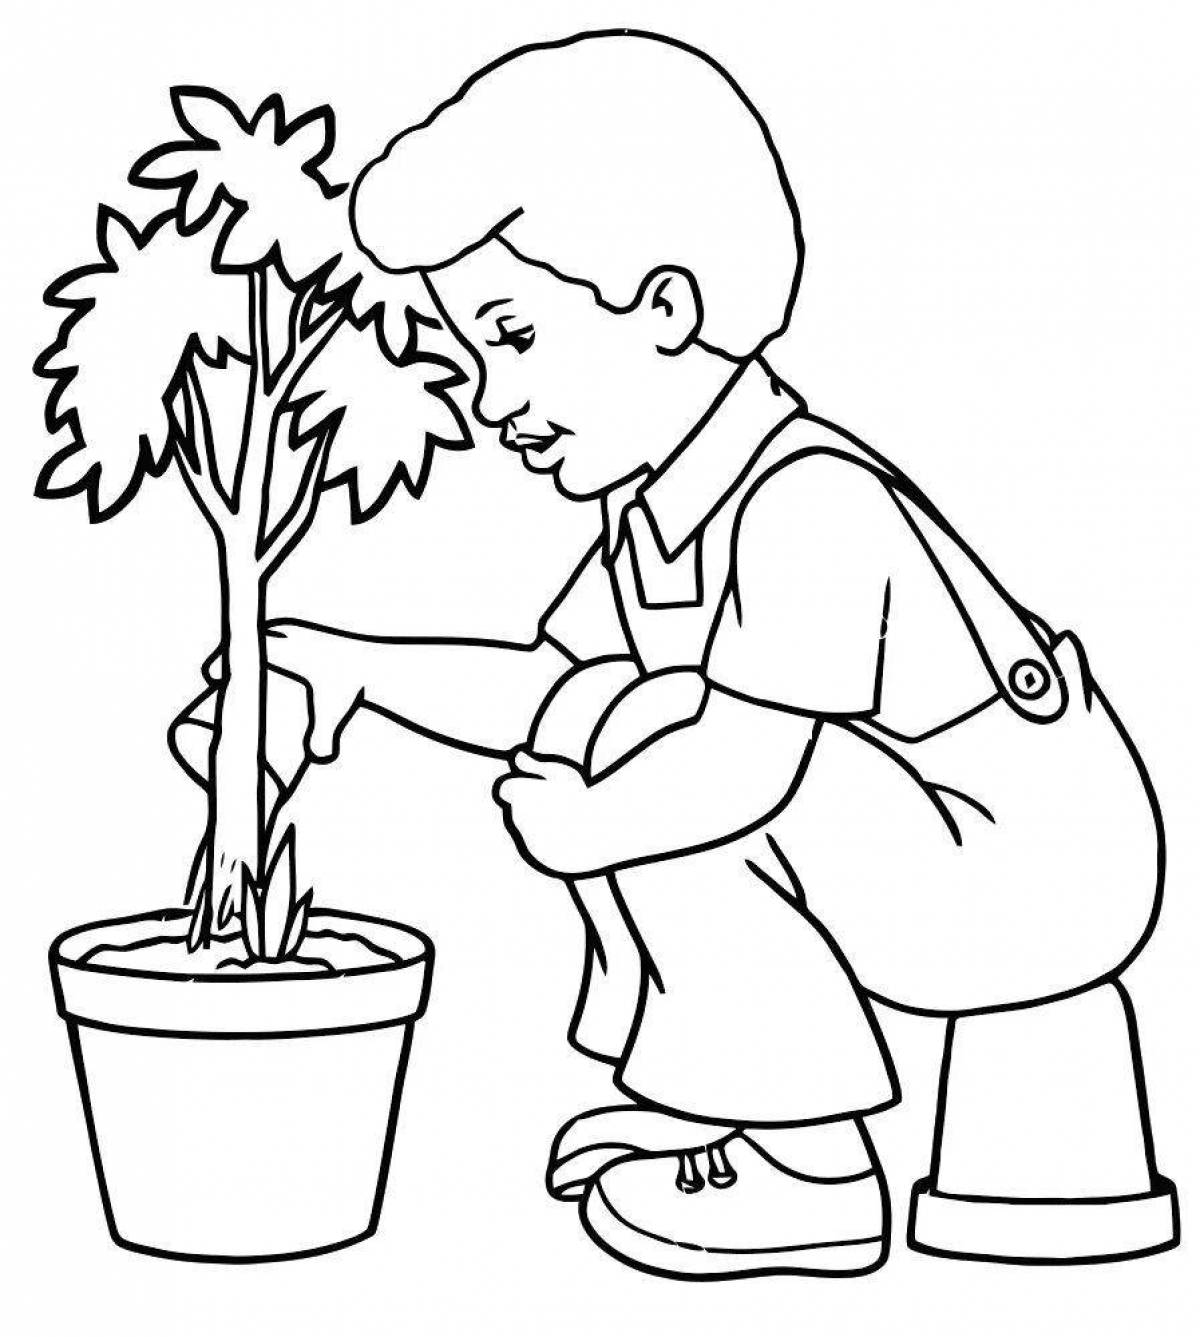 Houseplant care for kids #13